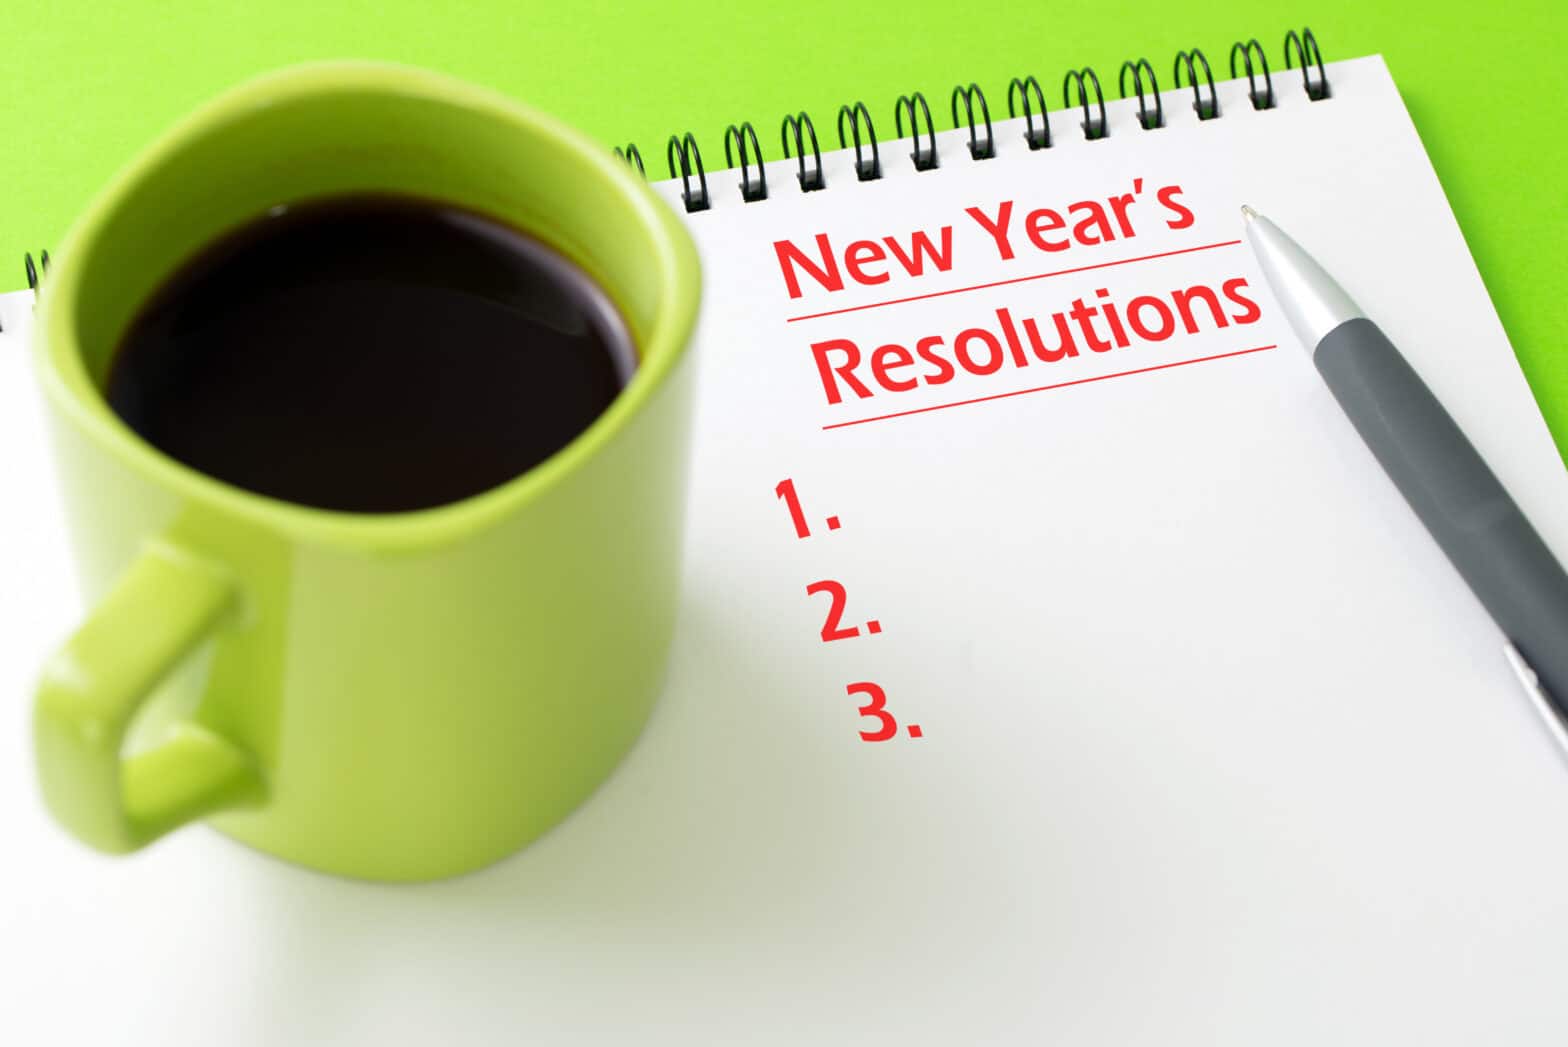 Keep New Year Resolutions to yourself, take actions first - a blog by Joanne Tan,10 Plus Brand, Inc., a full service digital marketing, advertising, SEO agency.